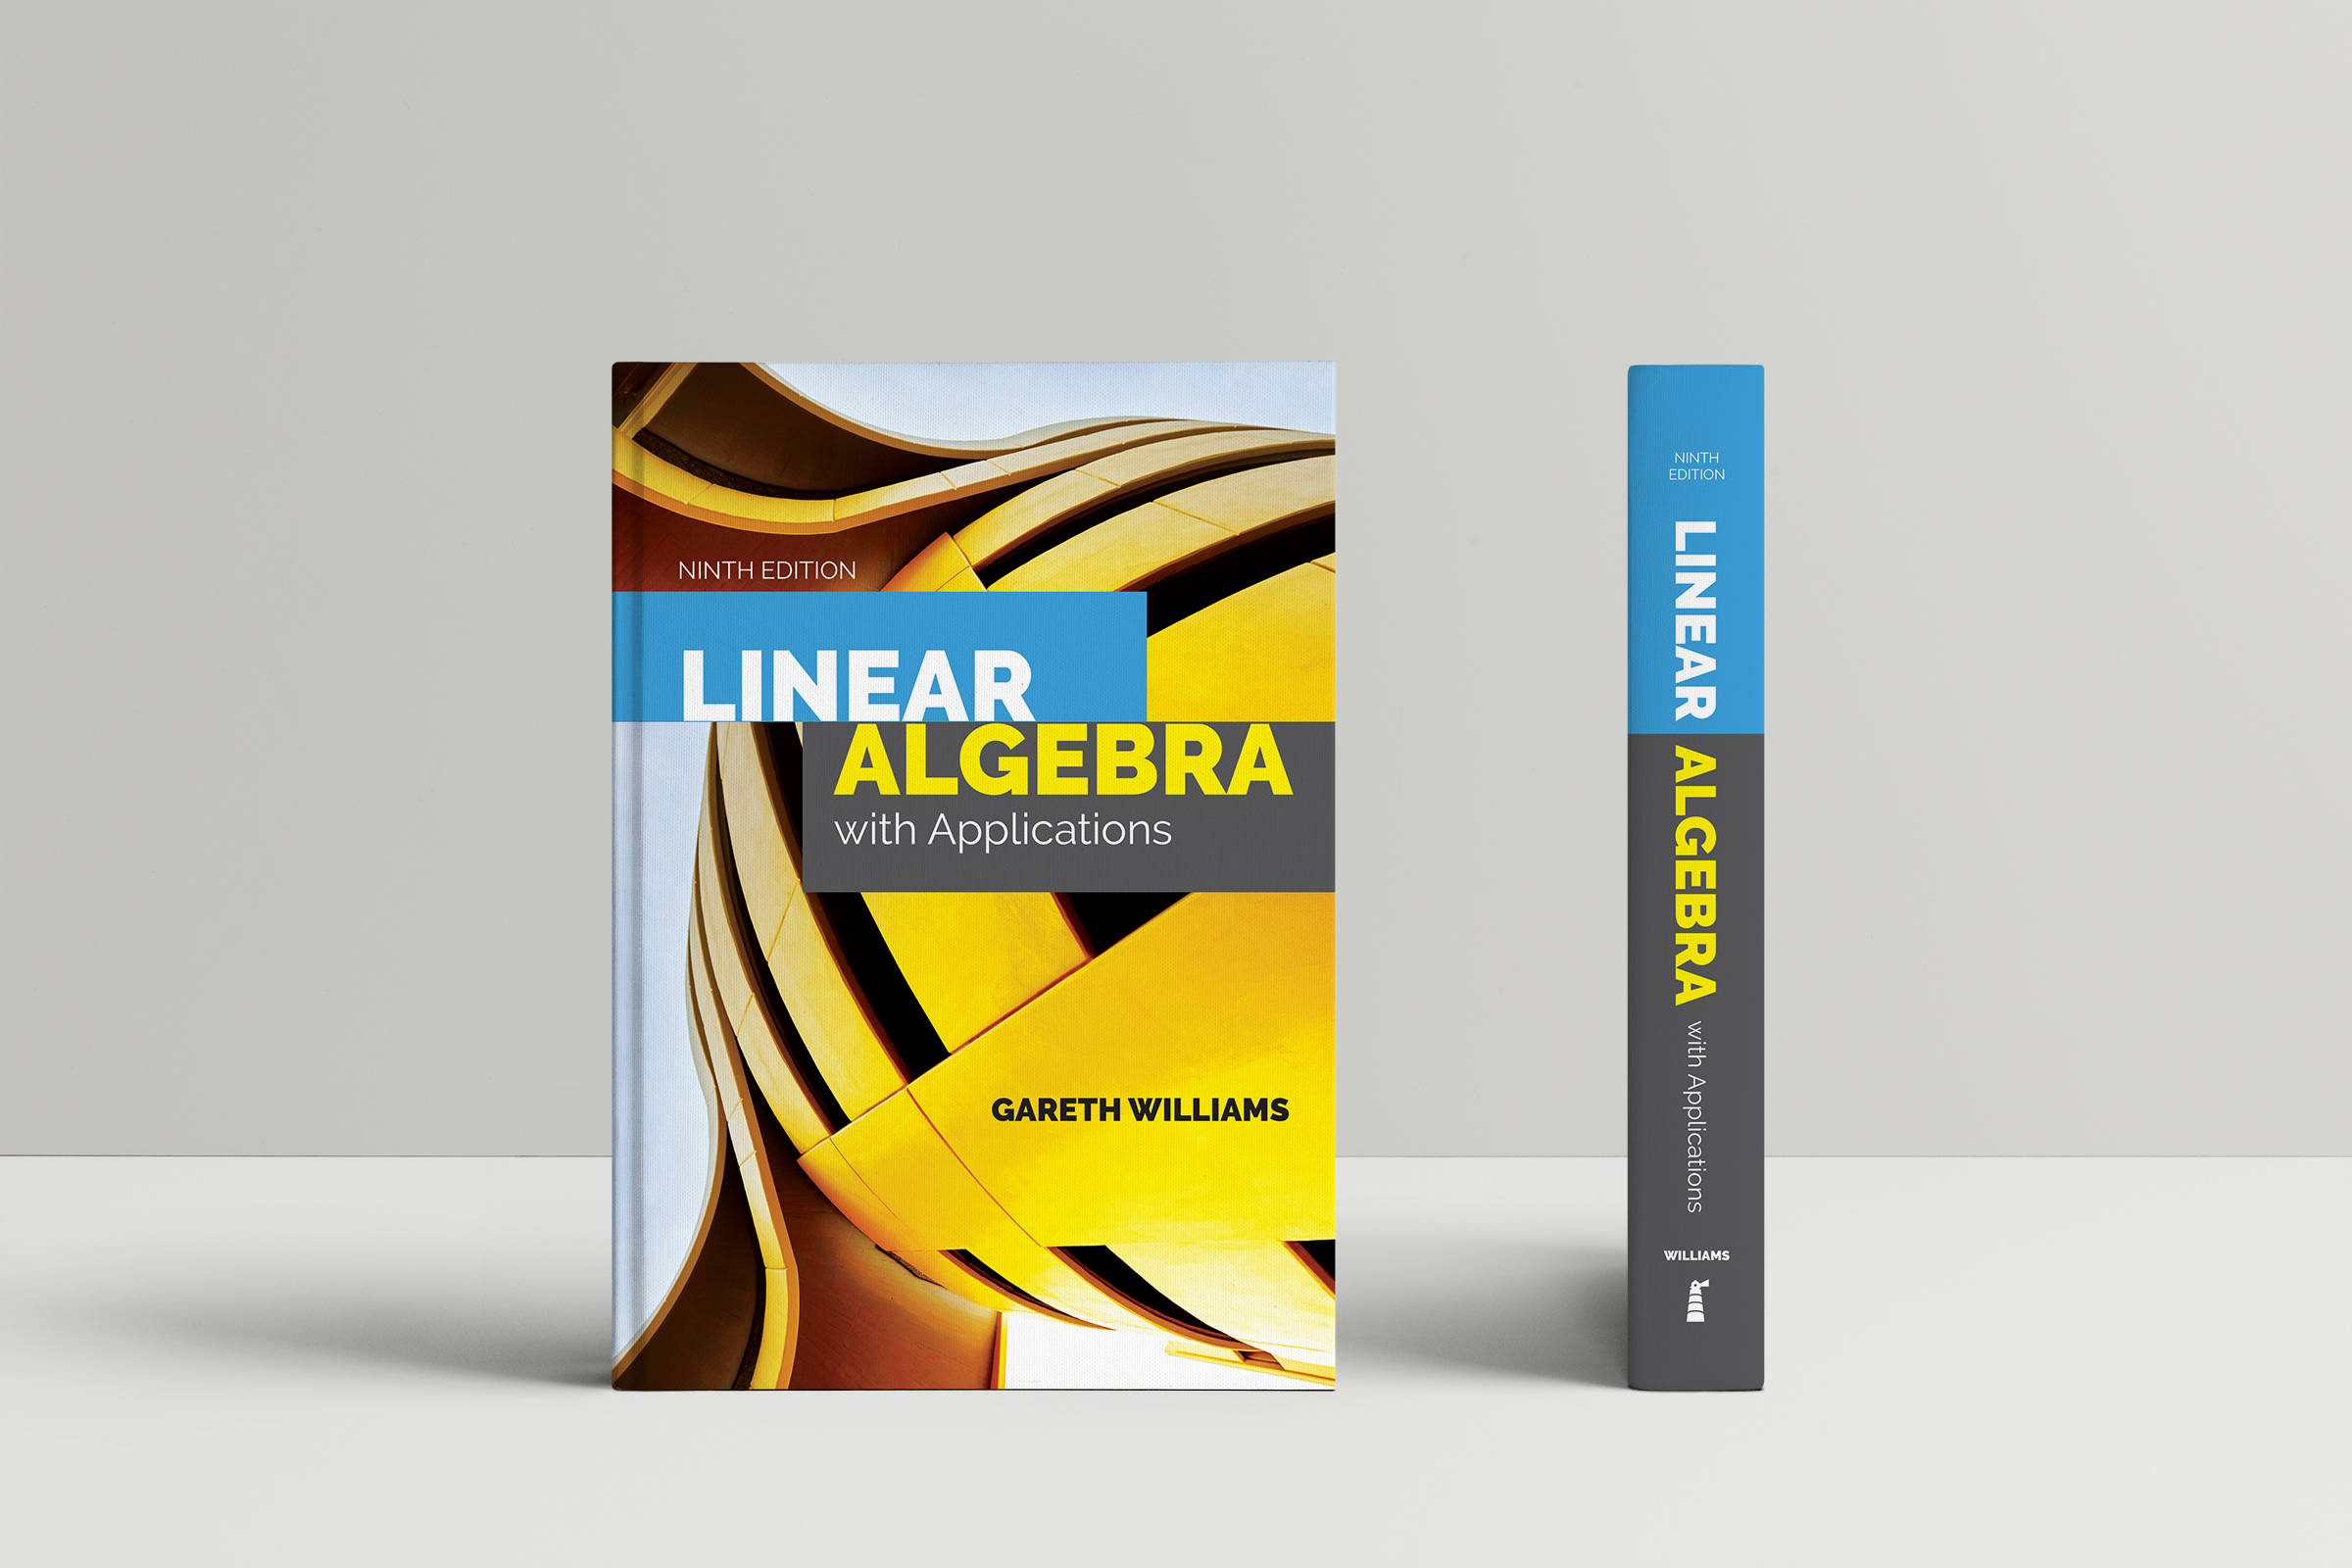 Linear Algebra with Applications, Ninth Edition